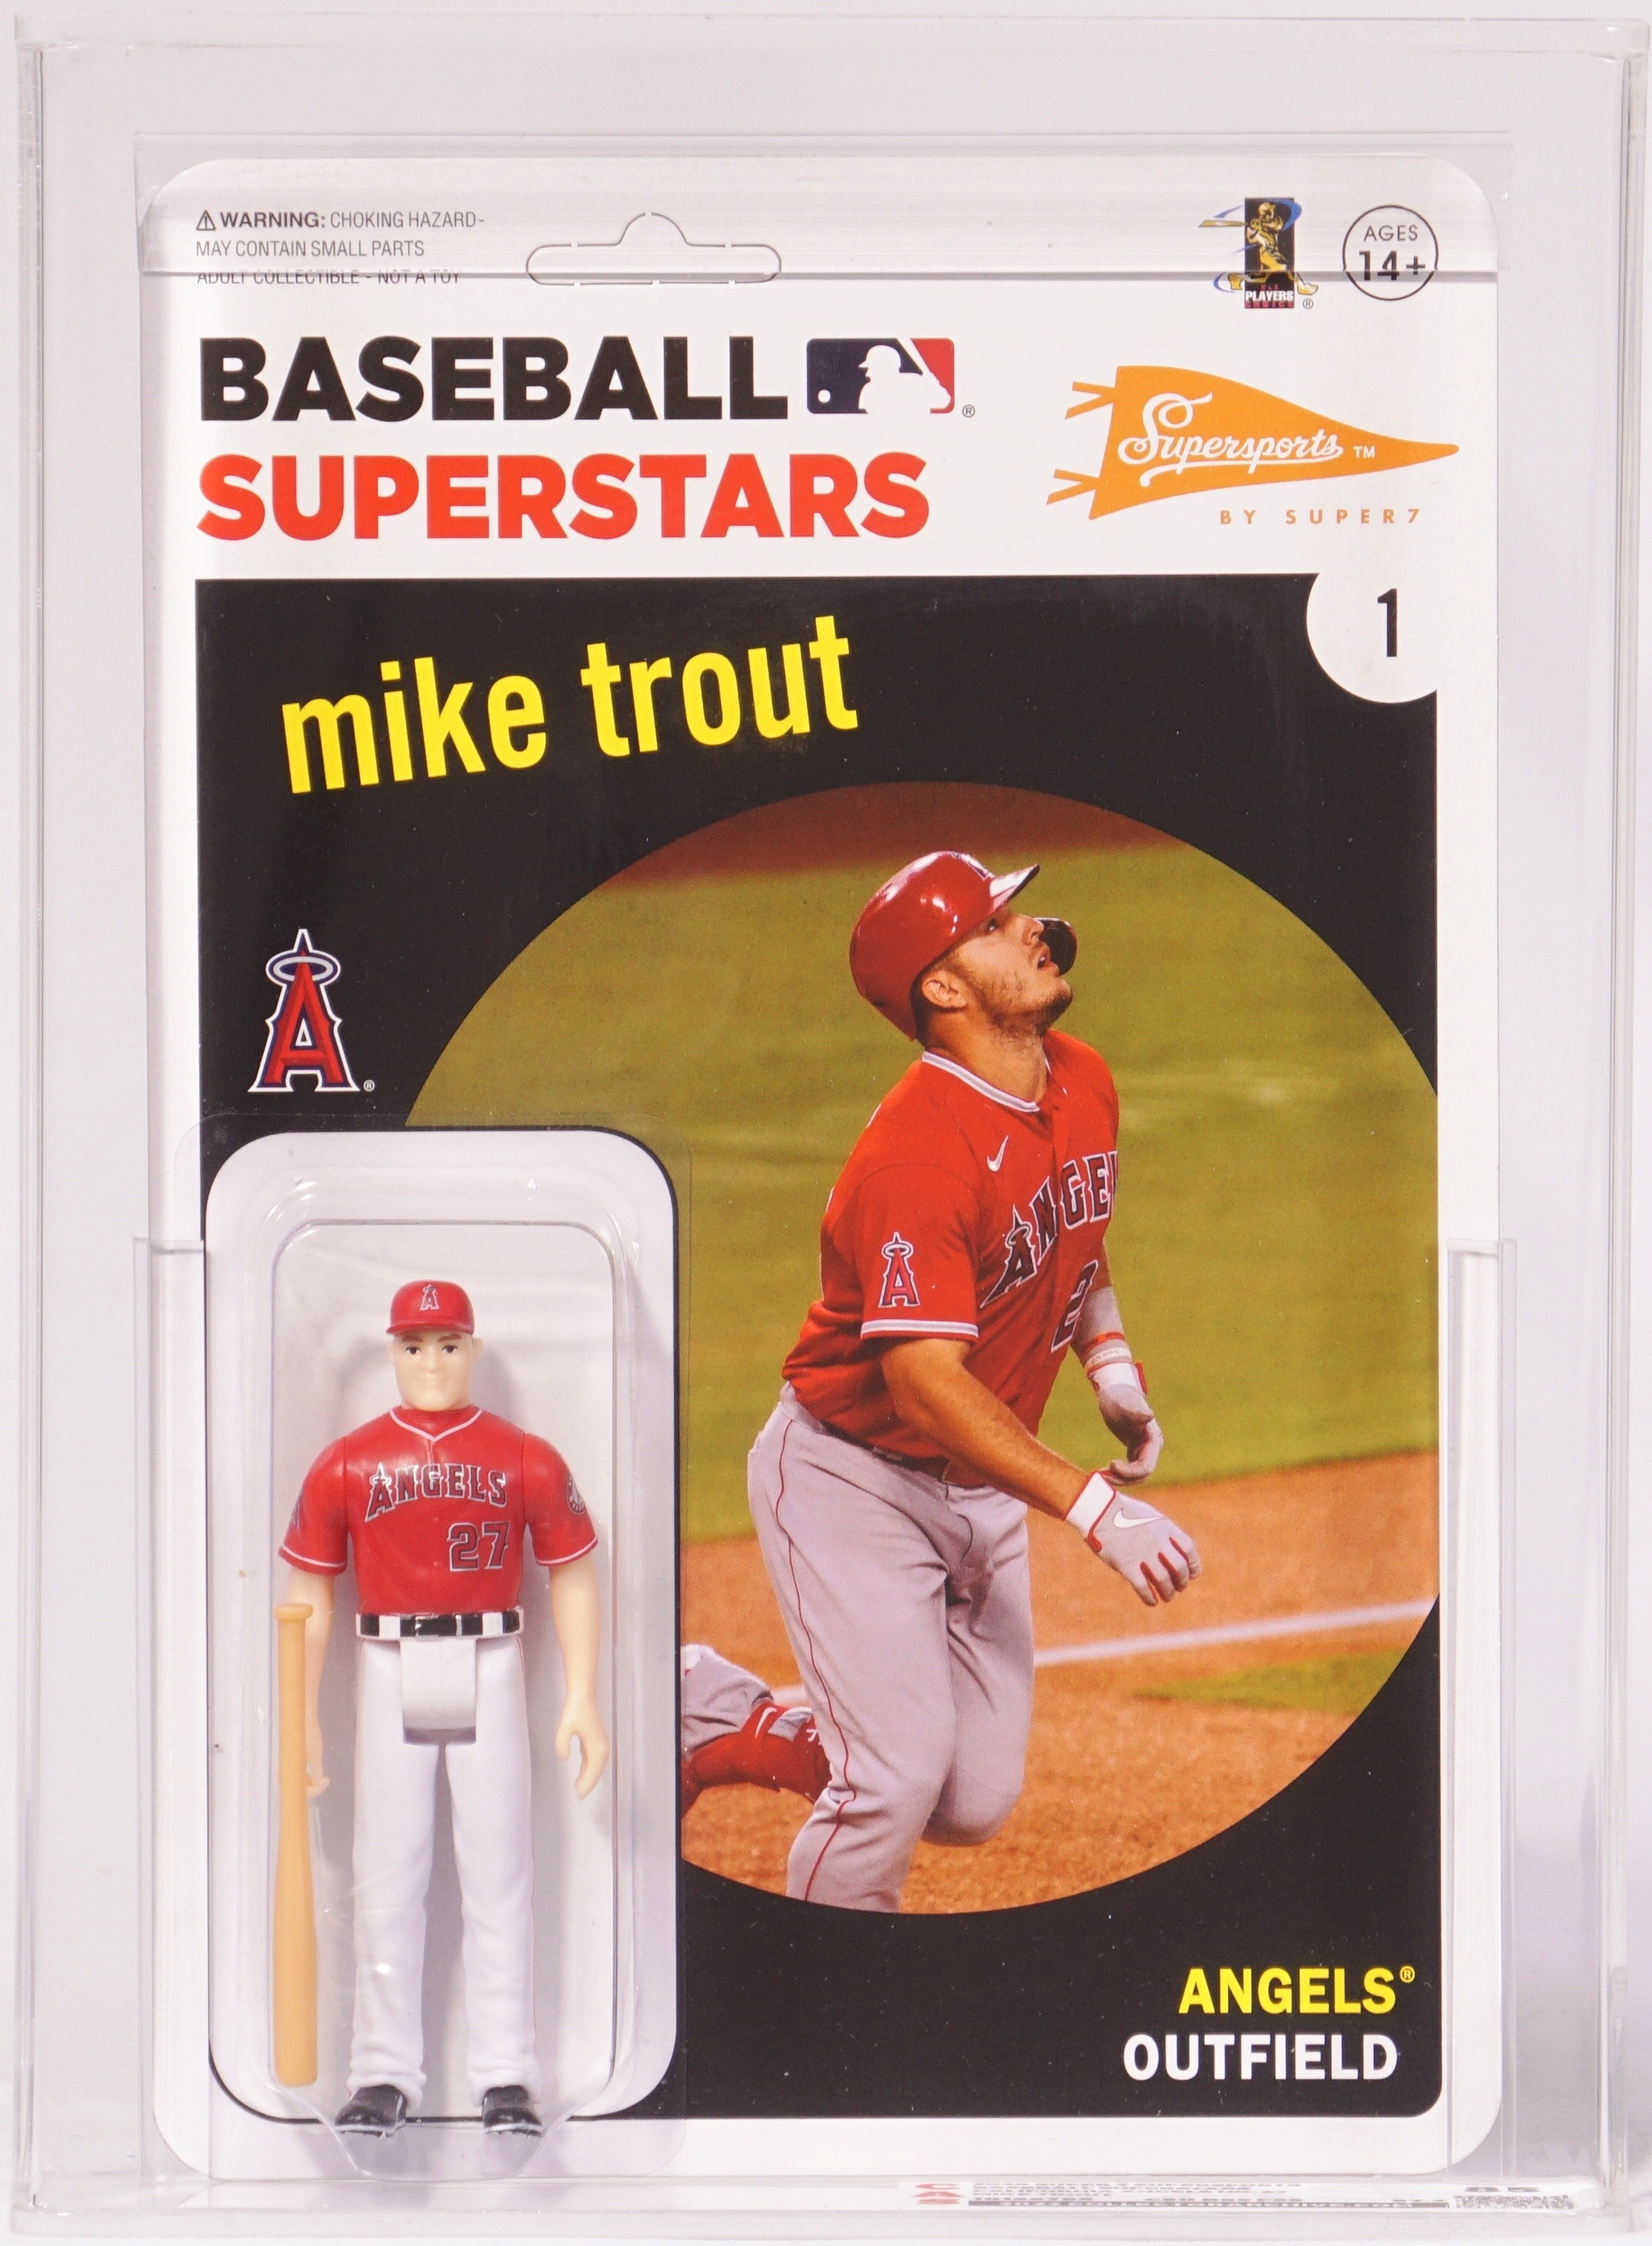 Mike Trout angels Baseball Jersey (Adult Small) (cheap)